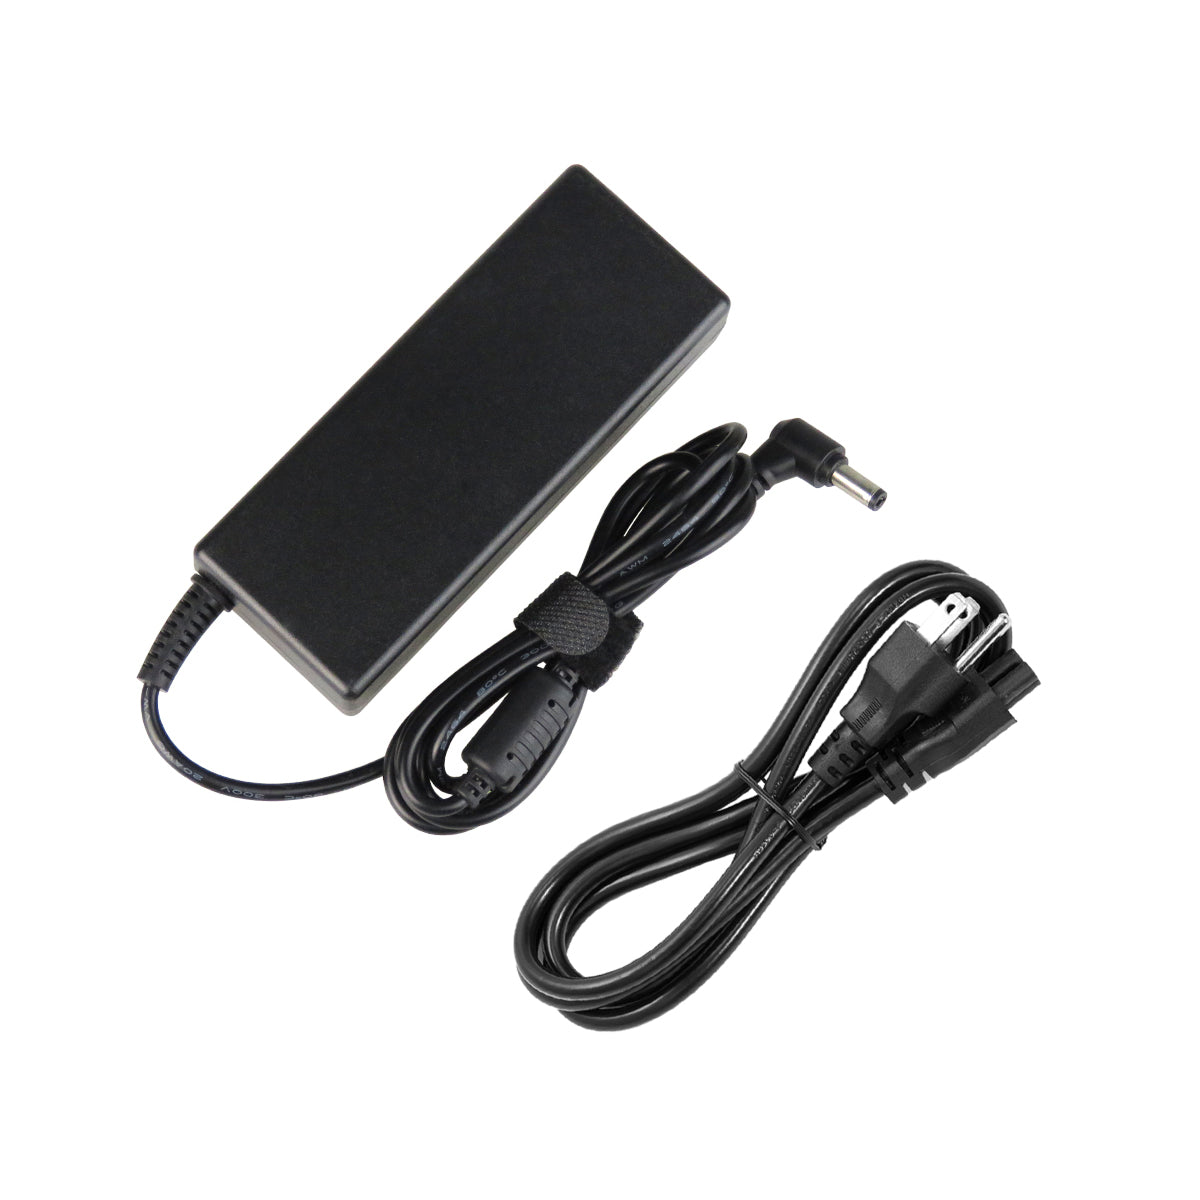 AC Adapter Charger for ASUS Z54 Notebook.